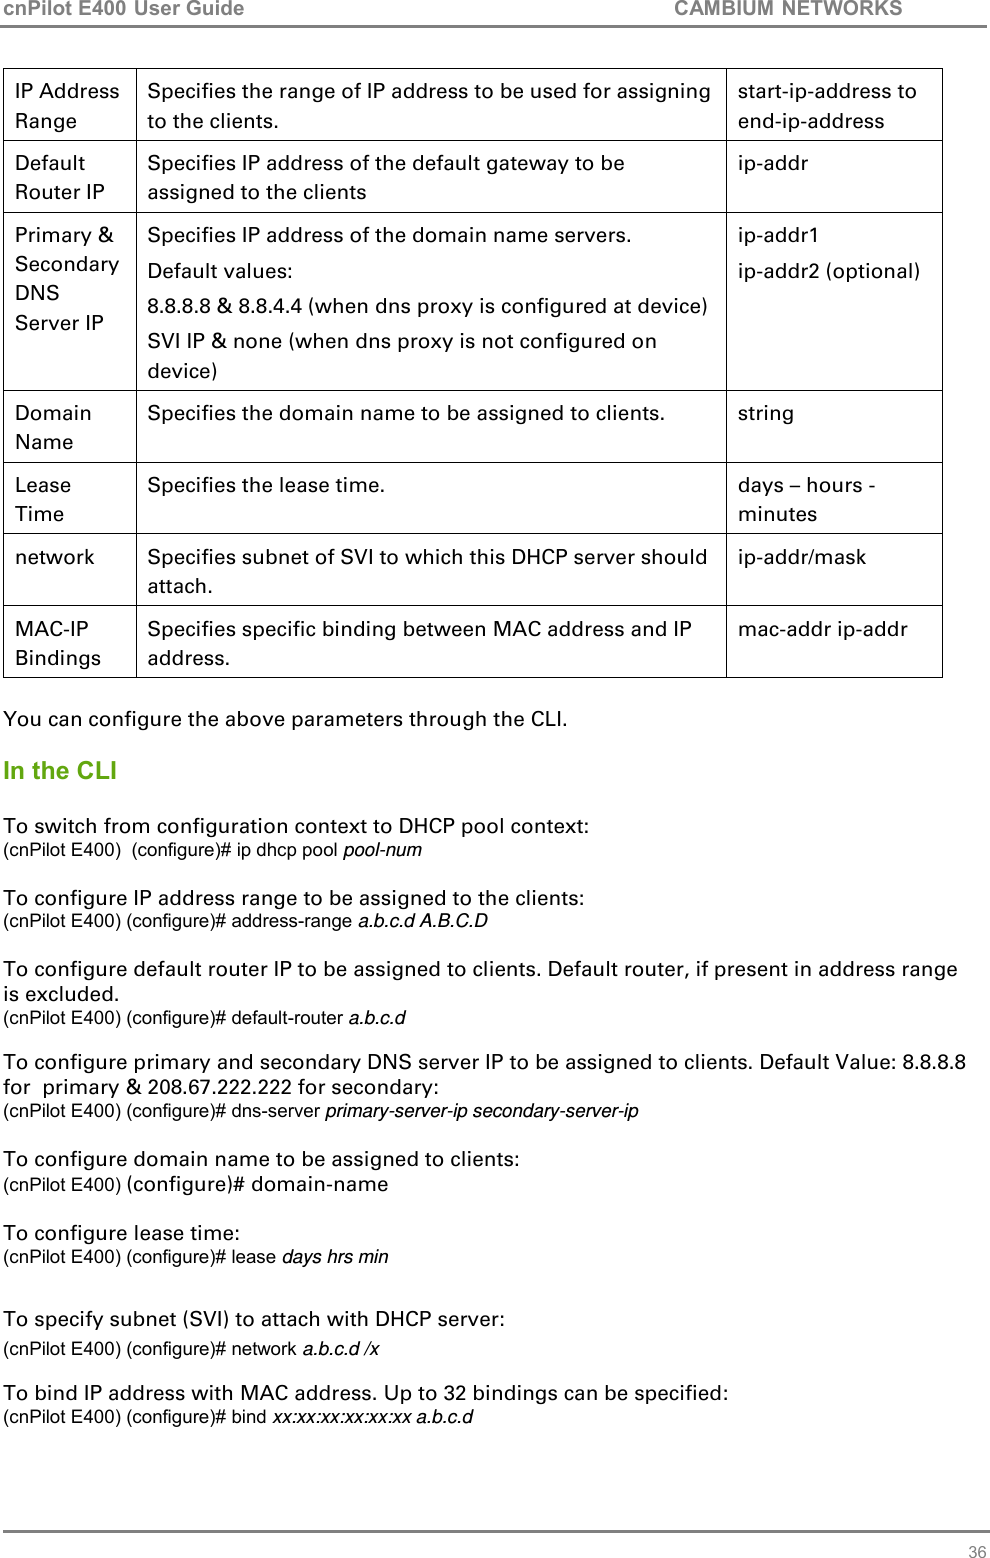 cnPilot E400 User Guide           CAMBIUM NETWORKS   36 IP Address Range Specifies the range of IP address to be used for assigning to the clients.  start-ip-address to end-ip-address Default Router IP Specifies IP address of the default gateway to be assigned to the clients ip-addr Primary &amp; Secondary DNS Server IP Specifies IP address of the domain name servers. Default values:  8.8.8.8 &amp; 8.8.4.4 (when dns proxy is configured at device) SVI IP &amp; none (when dns proxy is not configured on device) ip-addr1  ip-addr2 (optional) Domain Name Specifies the domain name to be assigned to clients. string Lease Time Specifies the lease time. days – hours - minutes network  Specifies subnet of SVI to which this DHCP server should attach. ip-addr/mask MAC-IP Bindings Specifies specific binding between MAC address and IP address. mac-addr ip-addr  You can configure the above parameters through the CLI.  In the CLI  To switch from configuration context to DHCP pool context: (cnPilot E400)  (configure)# ip dhcp pool pool-num  To configure IP address range to be assigned to the clients: (cnPilot E400) (configure)# address-range a.b.c.d A.B.C.D  To configure default router IP to be assigned to clients. Default router, if present in address range is excluded.  (cnPilot E400) (configure)# default-router a.b.c.d  To configure primary and secondary DNS server IP to be assigned to clients. Default Value: 8.8.8.8  for  primary &amp; 208.67.222.222 for secondary: (cnPilot E400) (configure)# dns-server primary-server-ip secondary-server-ip  To configure domain name to be assigned to clients: (cnPilot E400) (configure)# domain-name  To configure lease time: (cnPilot E400) (configure)# lease days hrs min  To specify subnet (SVI) to attach with DHCP server: (cnPilot E400) (configure)# network a.b.c.d /x  To bind IP address with MAC address. Up to 32 bindings can be specified: (cnPilot E400) (configure)# bind xx:xx:xx:xx:xx:xx a.b.c.d 